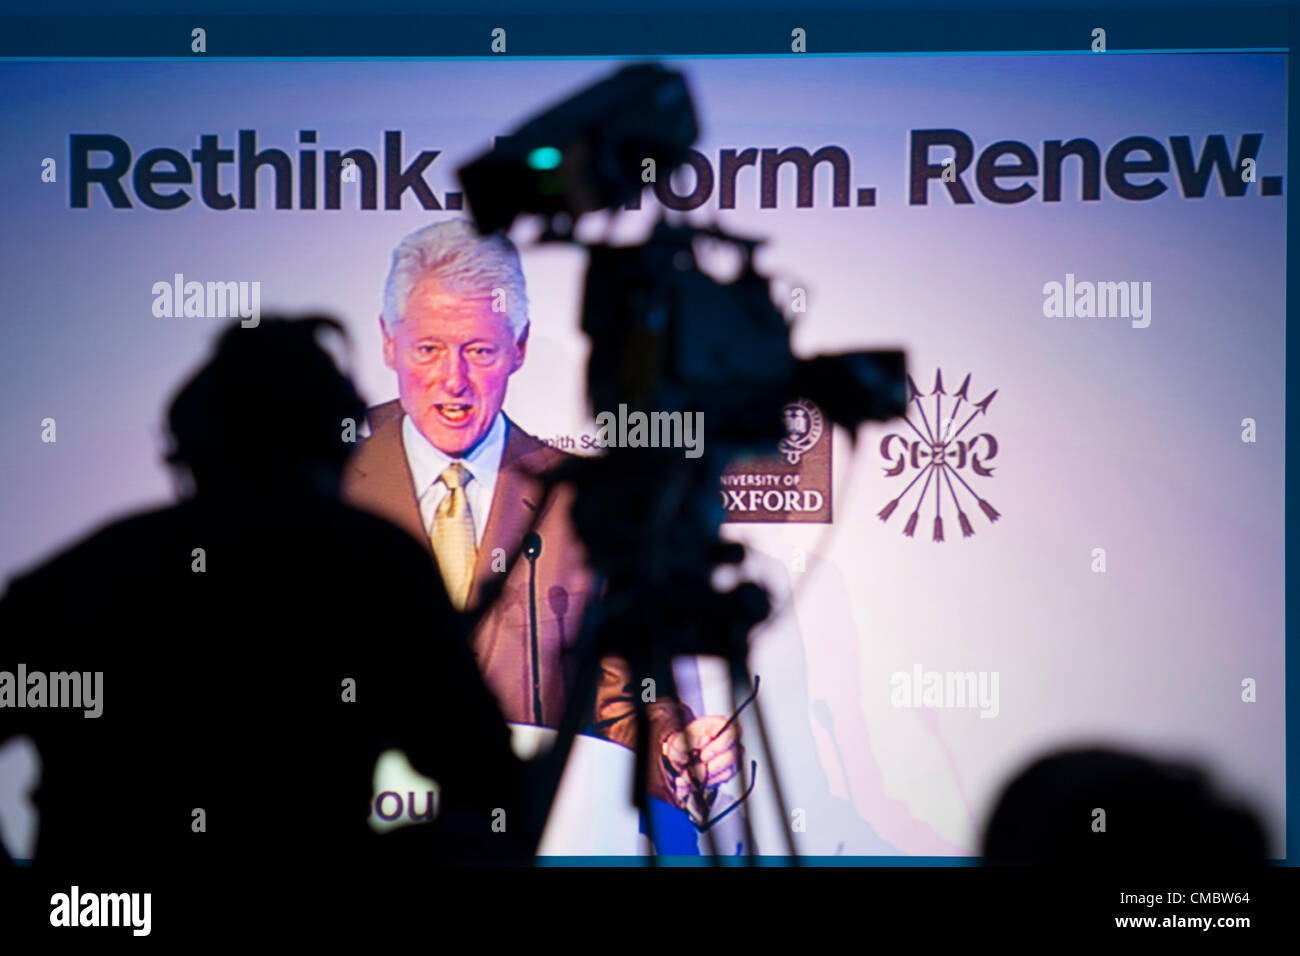 13th July 2012 President Bill Clinton Founder of the William J. Clinton Foundation and 42nd President of the United States of America, ReSource 2 day conference, discussing and challenging preconceptions about the current political and economic systems, 250 global leaders in business, finance, academia and politics starting a new conversation on managing natural resources longer term thinking and aligning people and profit. ReSource is founded by The Rothschild Foundation, University of Oxford and Smith School of Enterprise and the Environment, Hosted at University of Oxford's Examination Scho Stock Photo